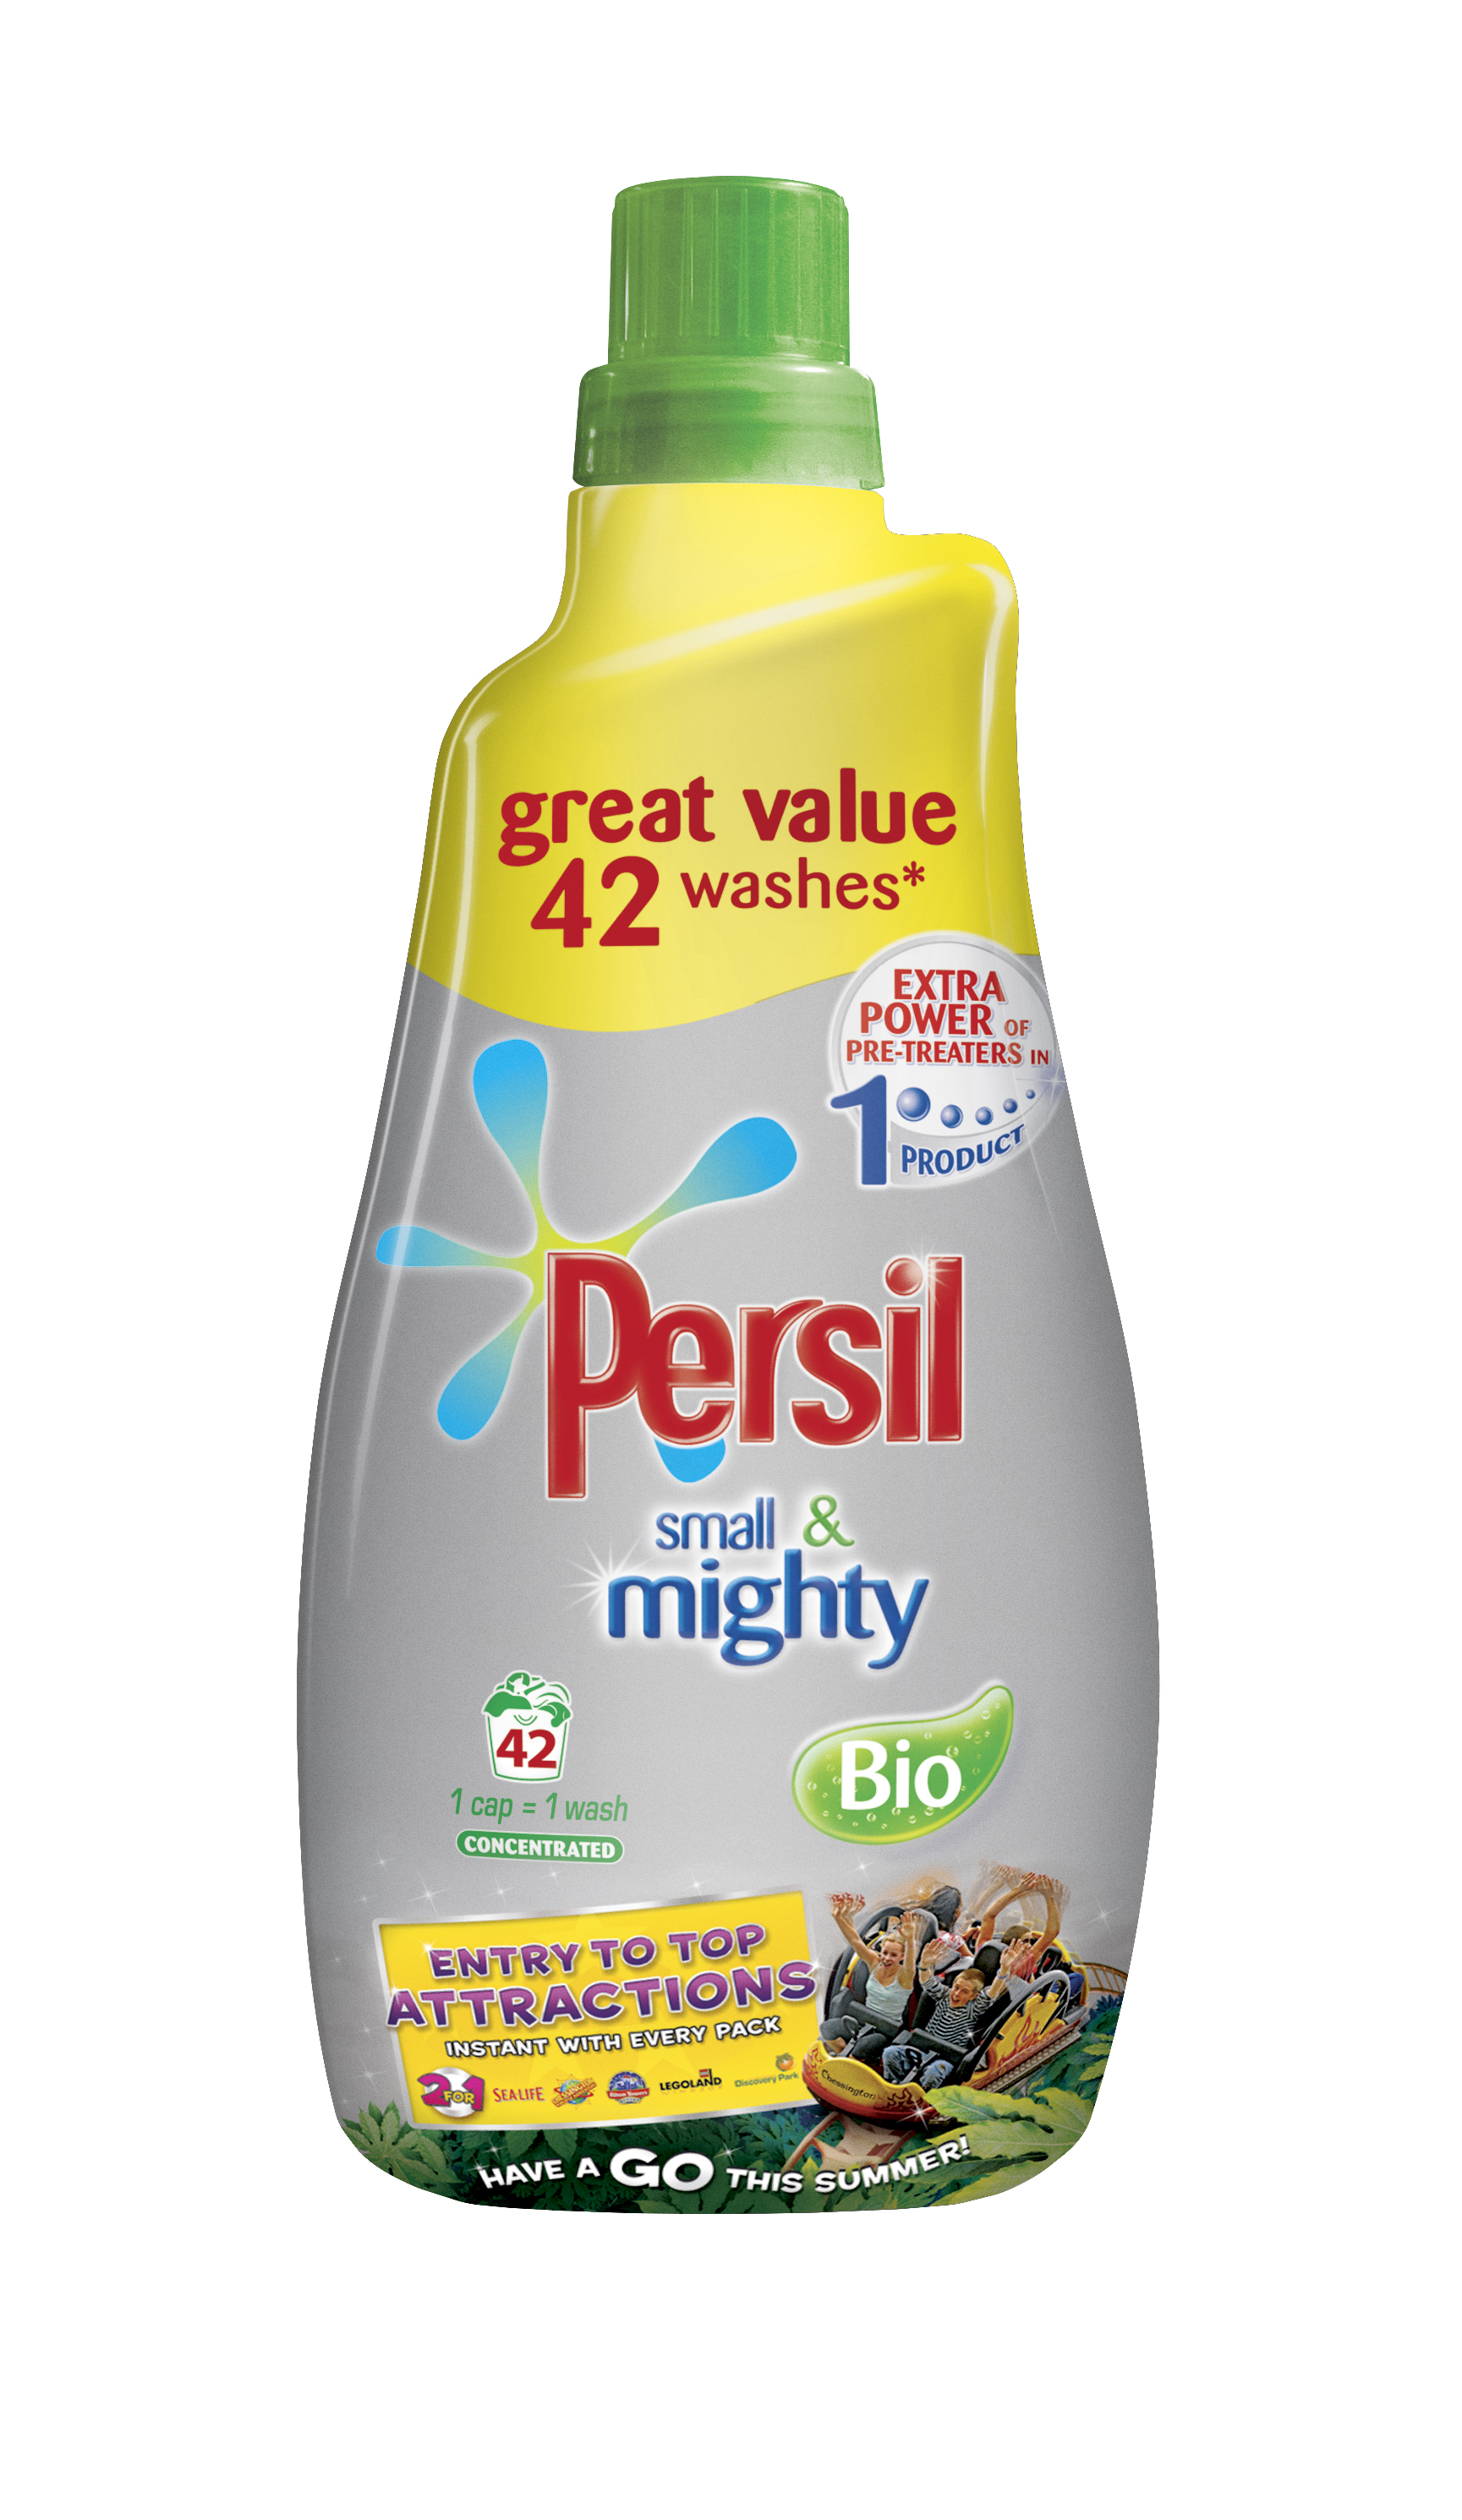 Persil small & mighty